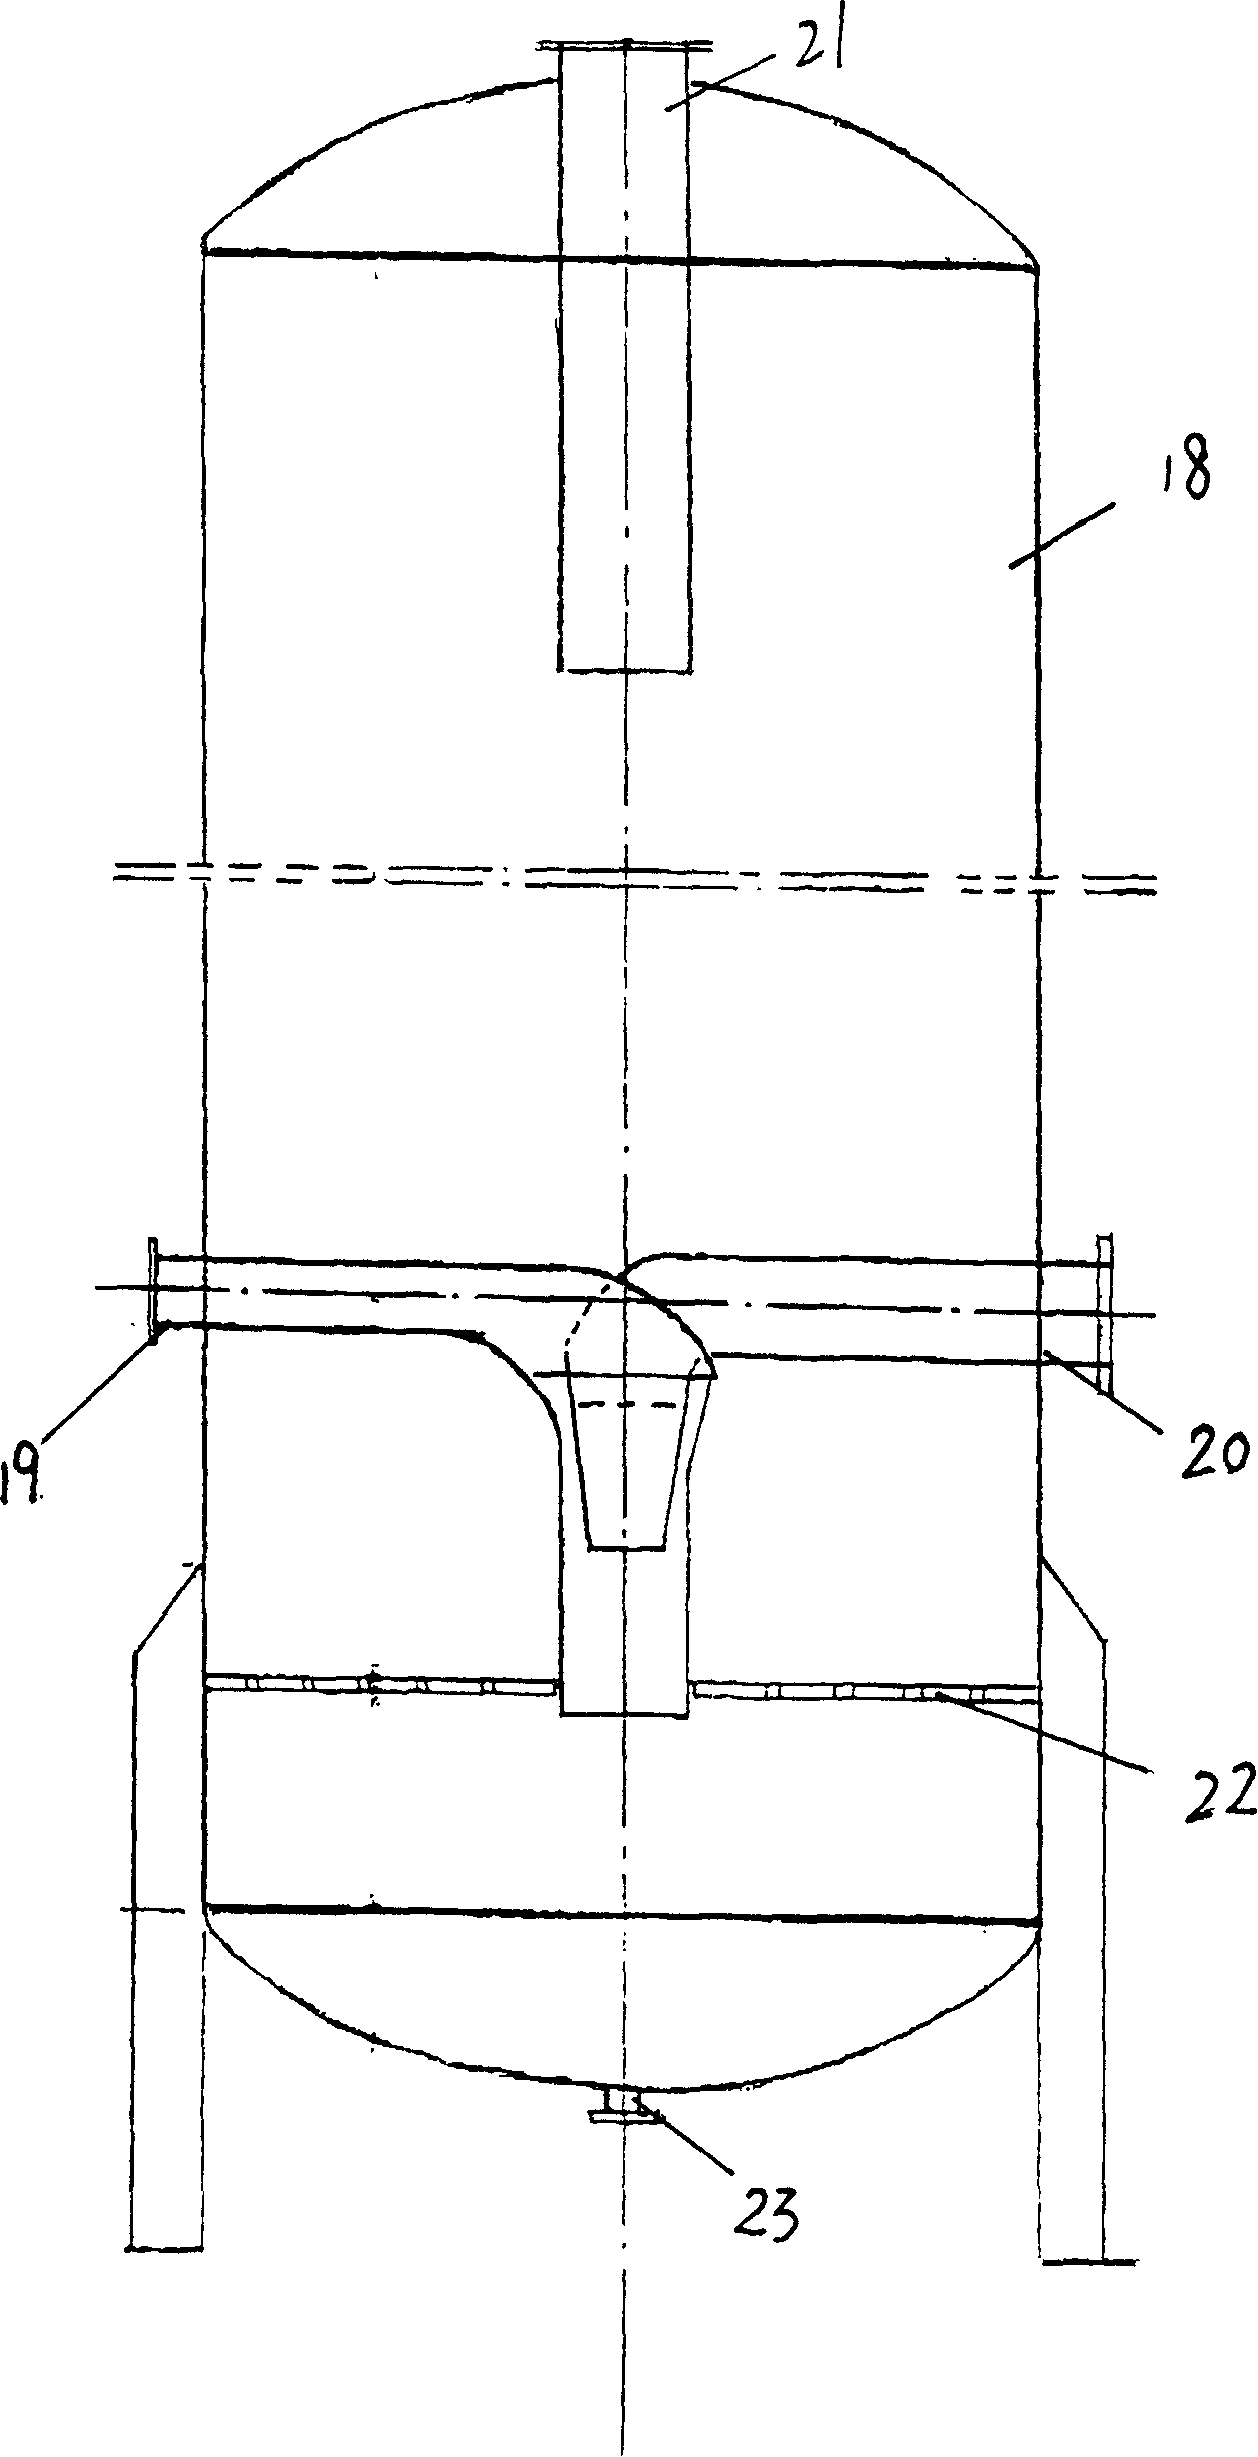 Device and method for producing half-water gas by employing oxygen-enriched air